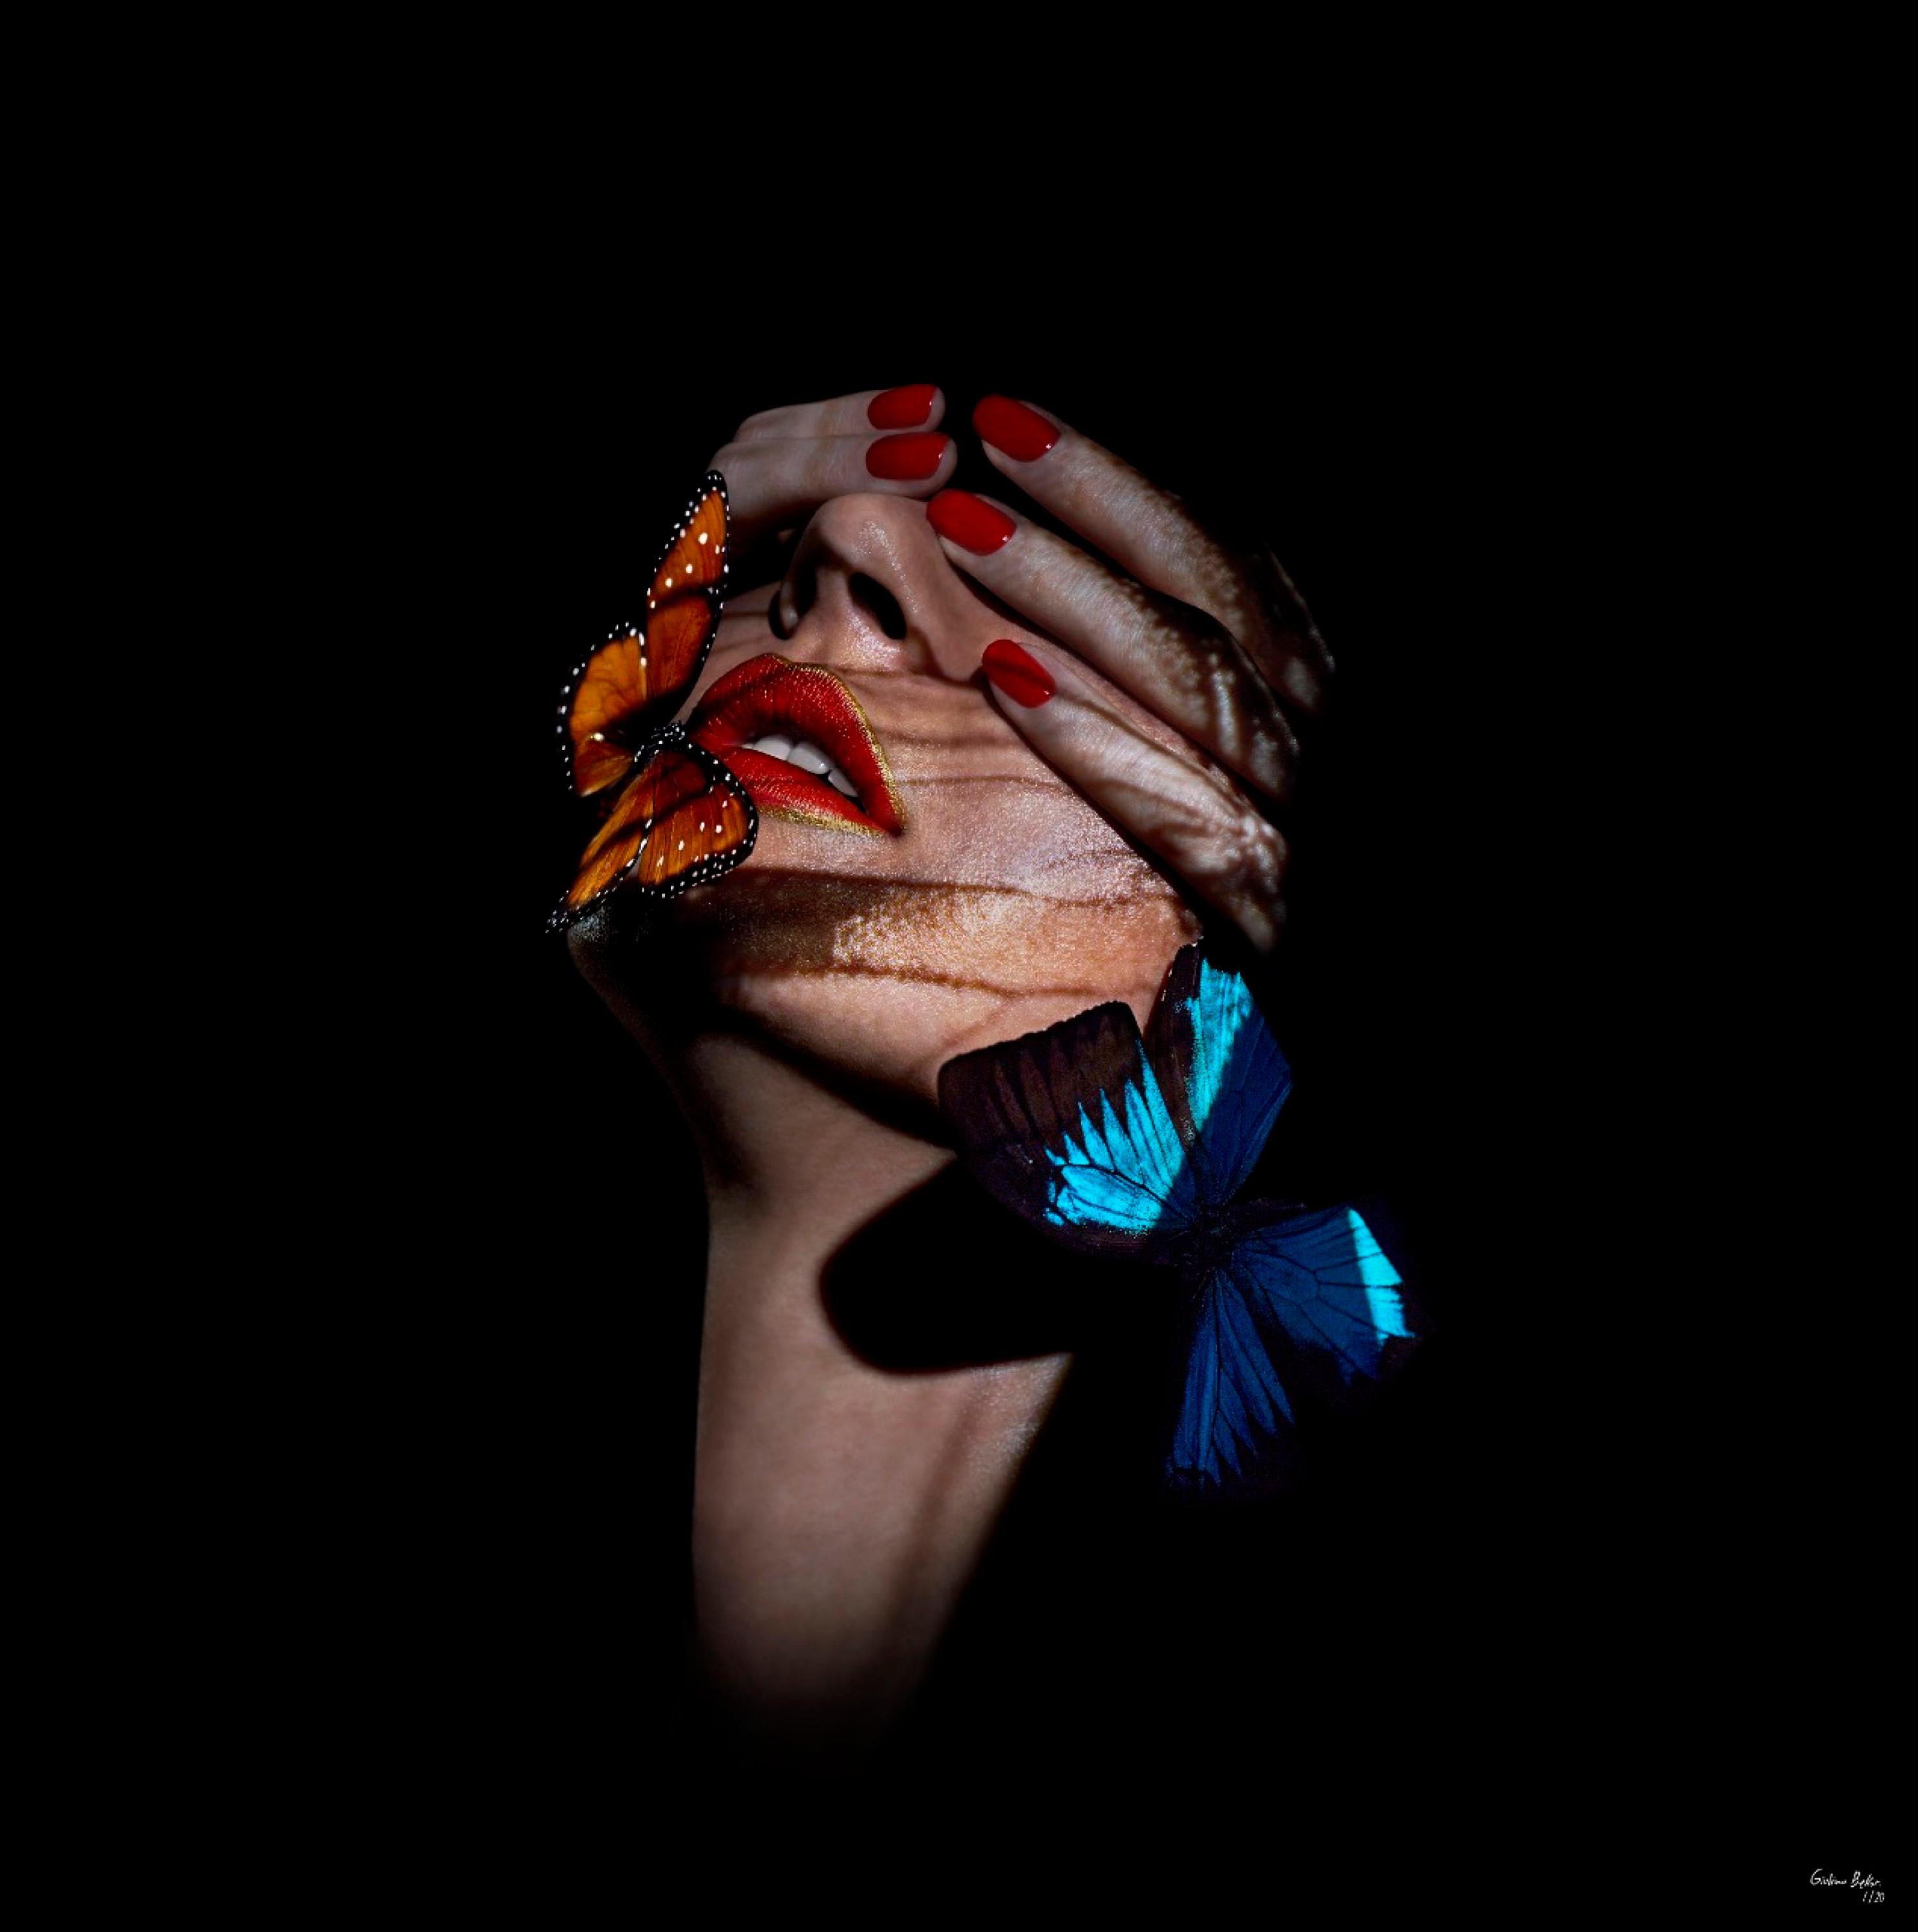 "Butterfly 6" (FRAMED) Photography 16" x 16" in Edition 1/20 by Giuliano Bekor

Title: Butterfly B12
Year: 2018
Print size: 16" x 16" Inch
Framed size: 20" x 20" Inch 
Edition: 1/20
Artist proof: 2

Medium:  
Archival fine art Fujiflex print on